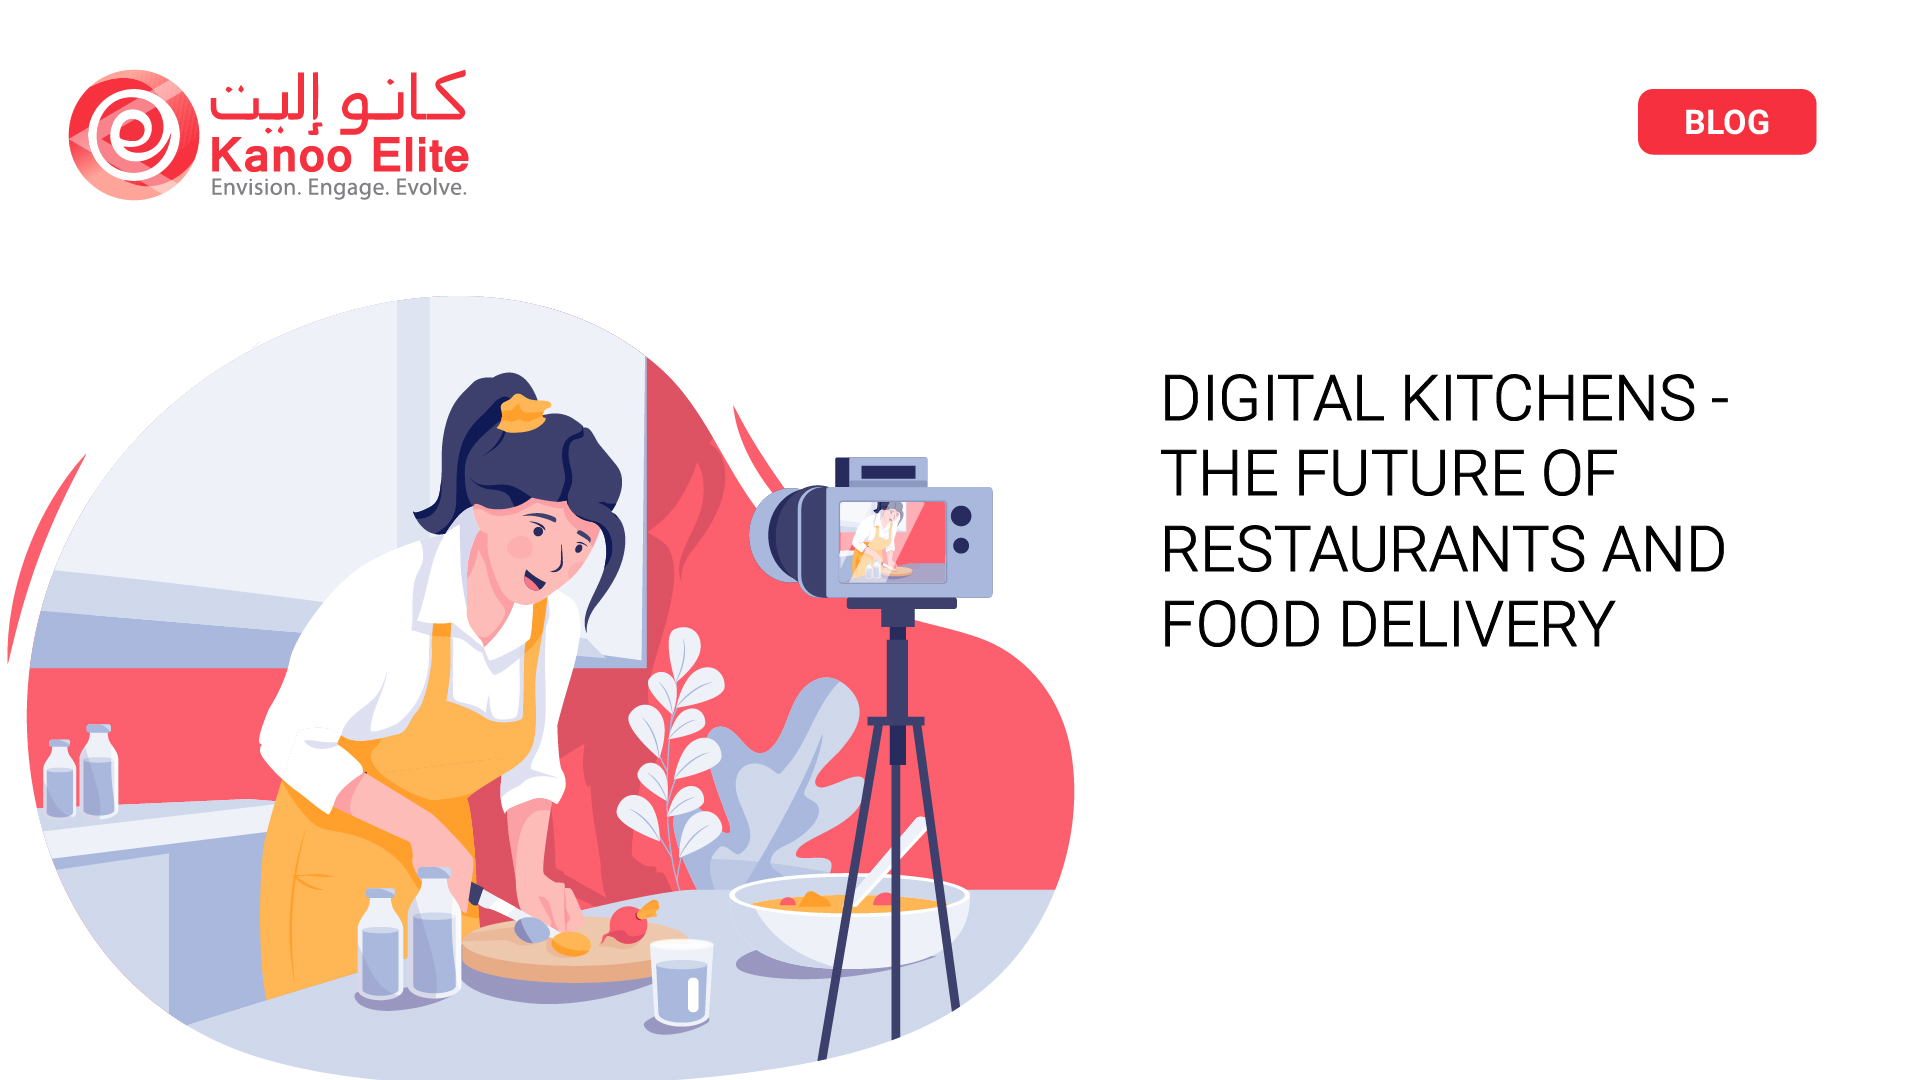 Digital Kitchens – the Future of Restaurants and Food Delivery